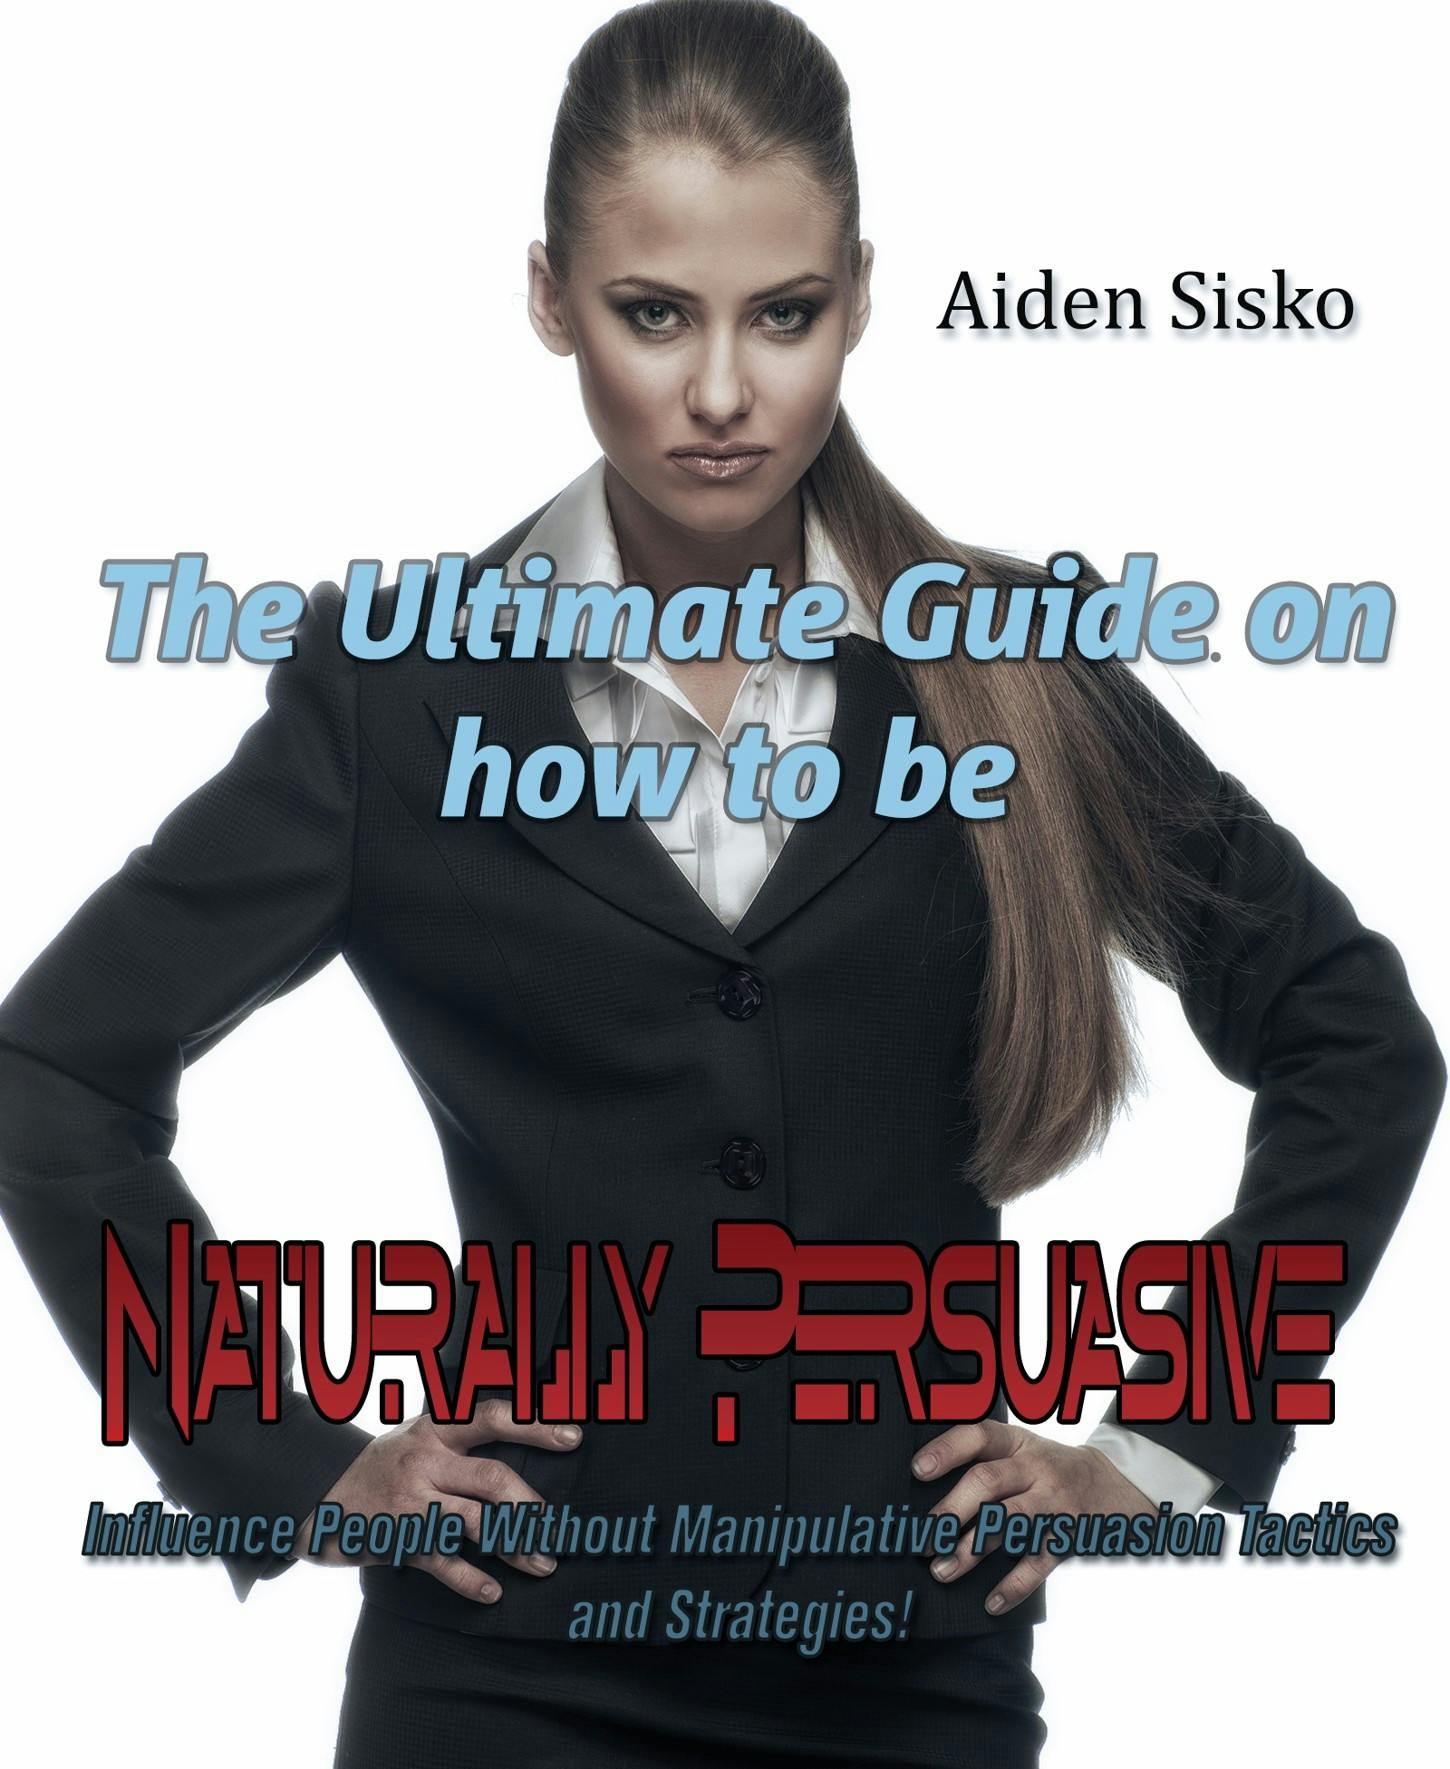 The Ultimate Guide On How to Be Naturally Persuasive - Aiden Sisko